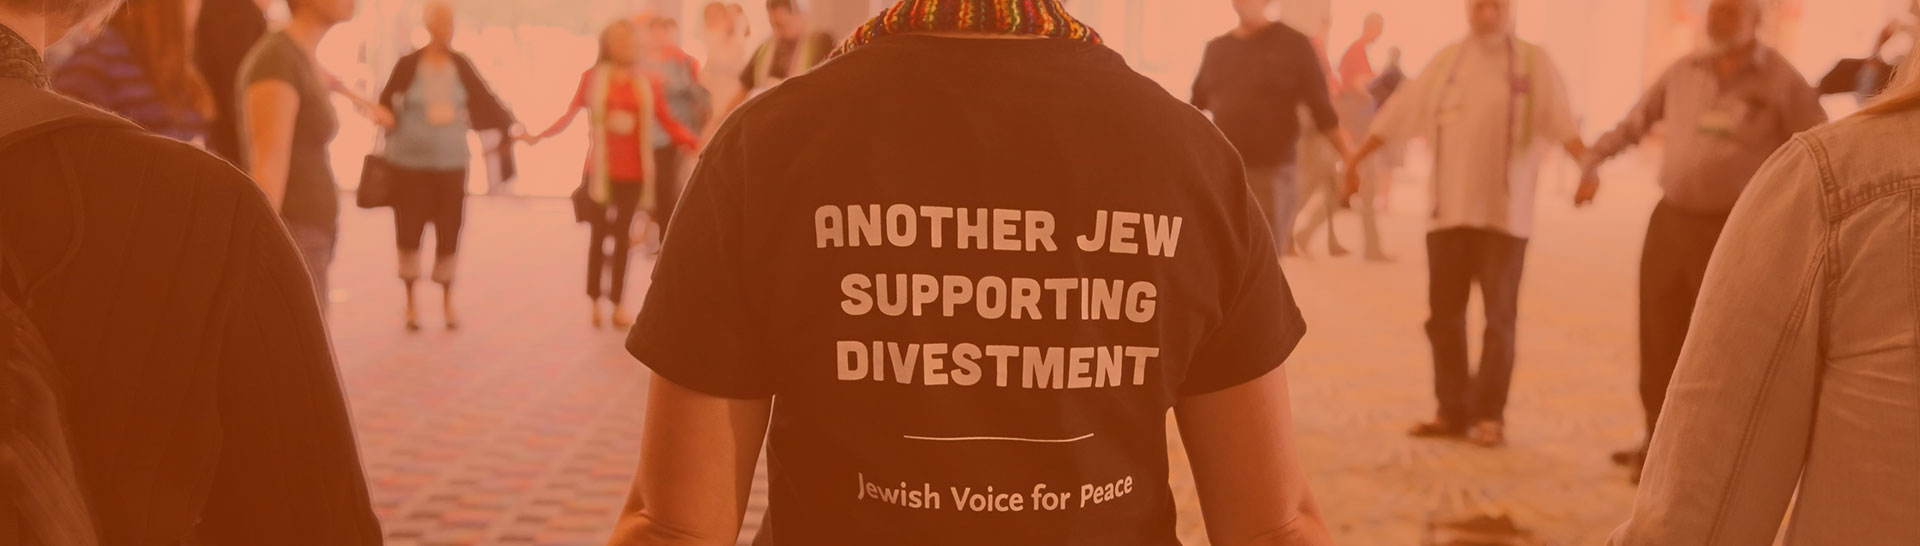 title-another-jew-supporting-divestment